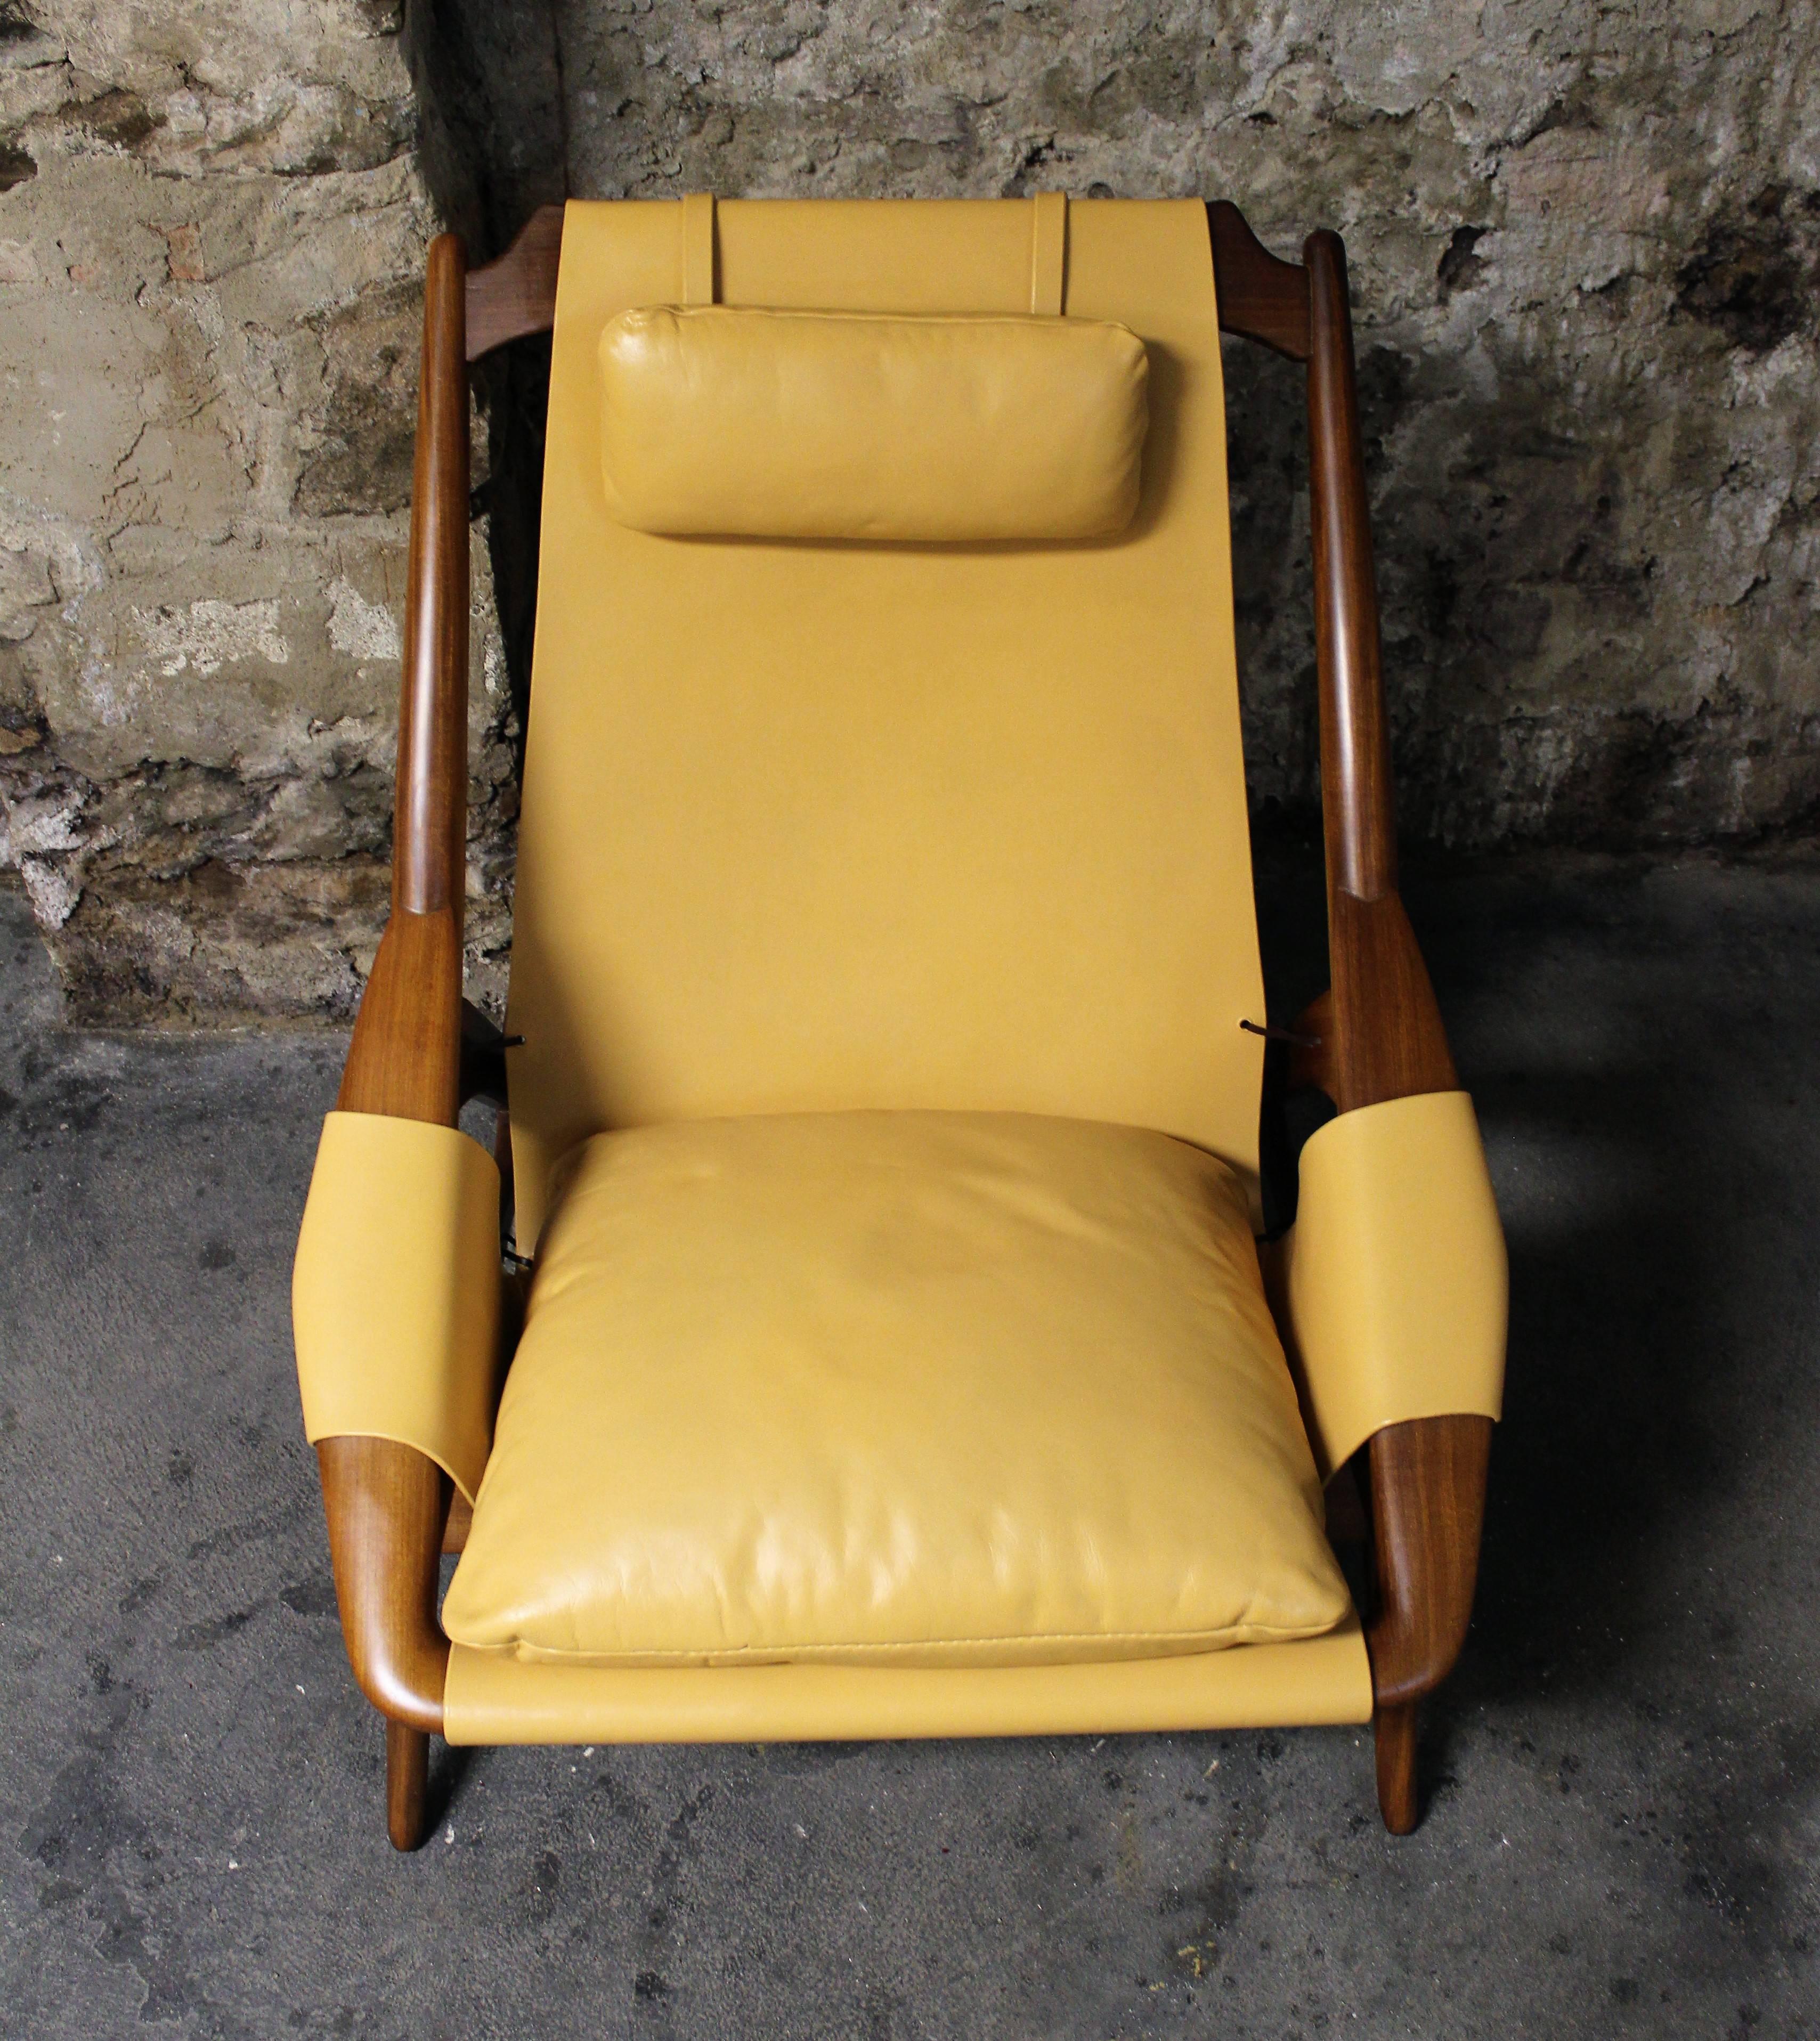 20th Century W.D. Andersag Italian Leather Lounge Chair